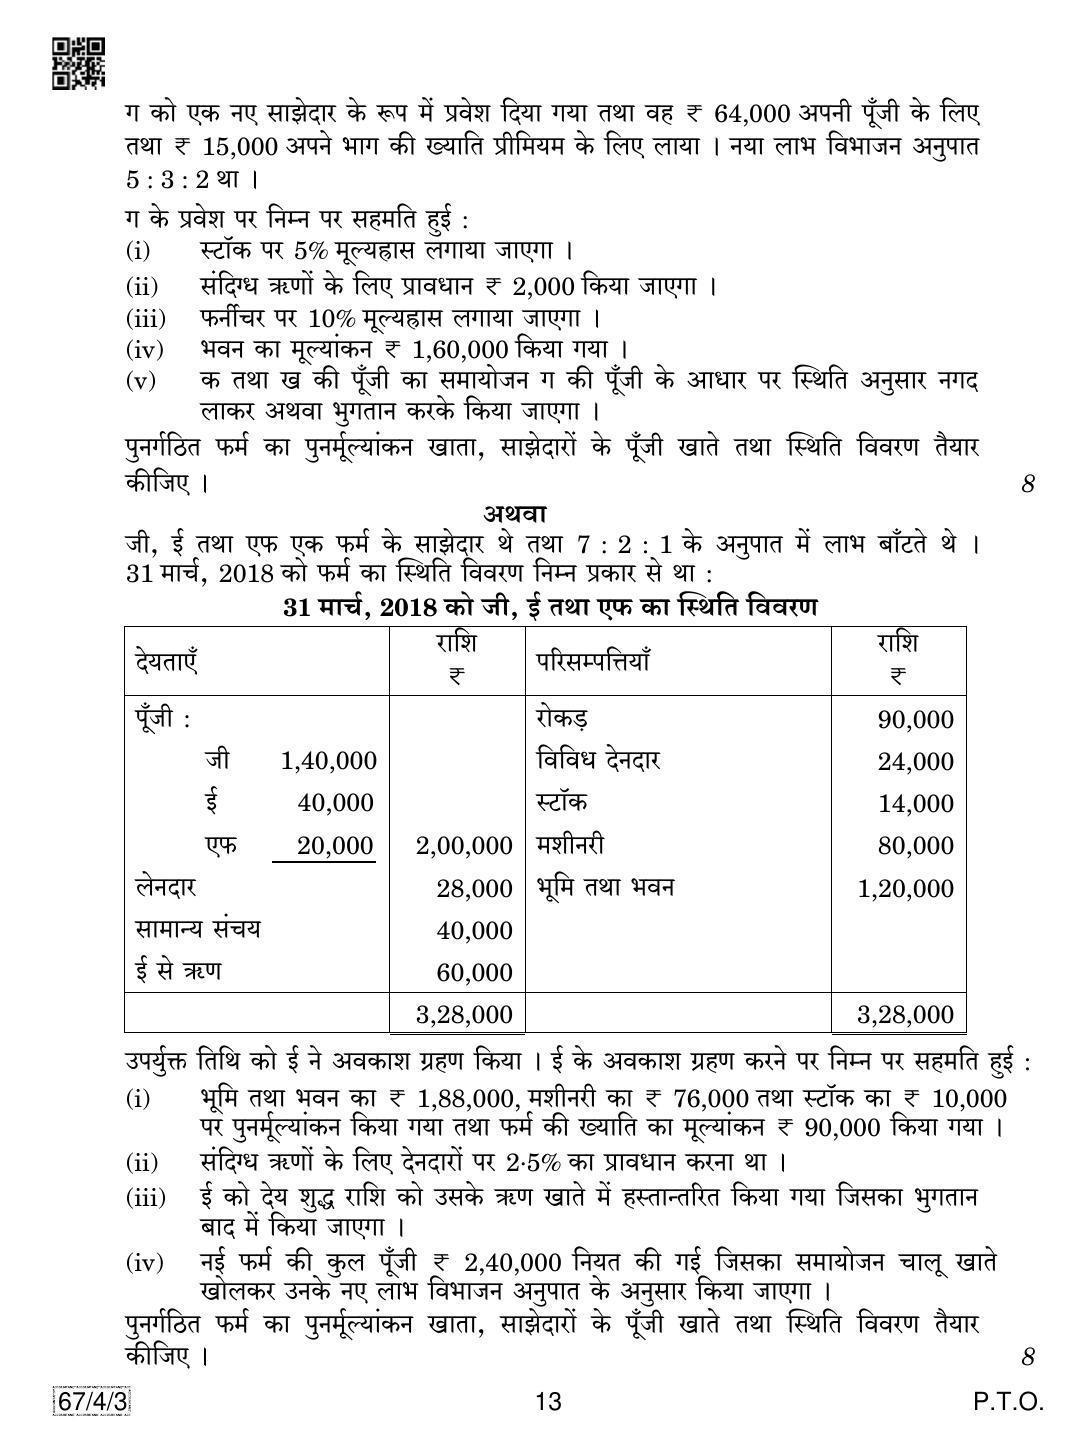 CBSE Class 12 67-4-3 Accountancy 2019 Question Paper - Page 13